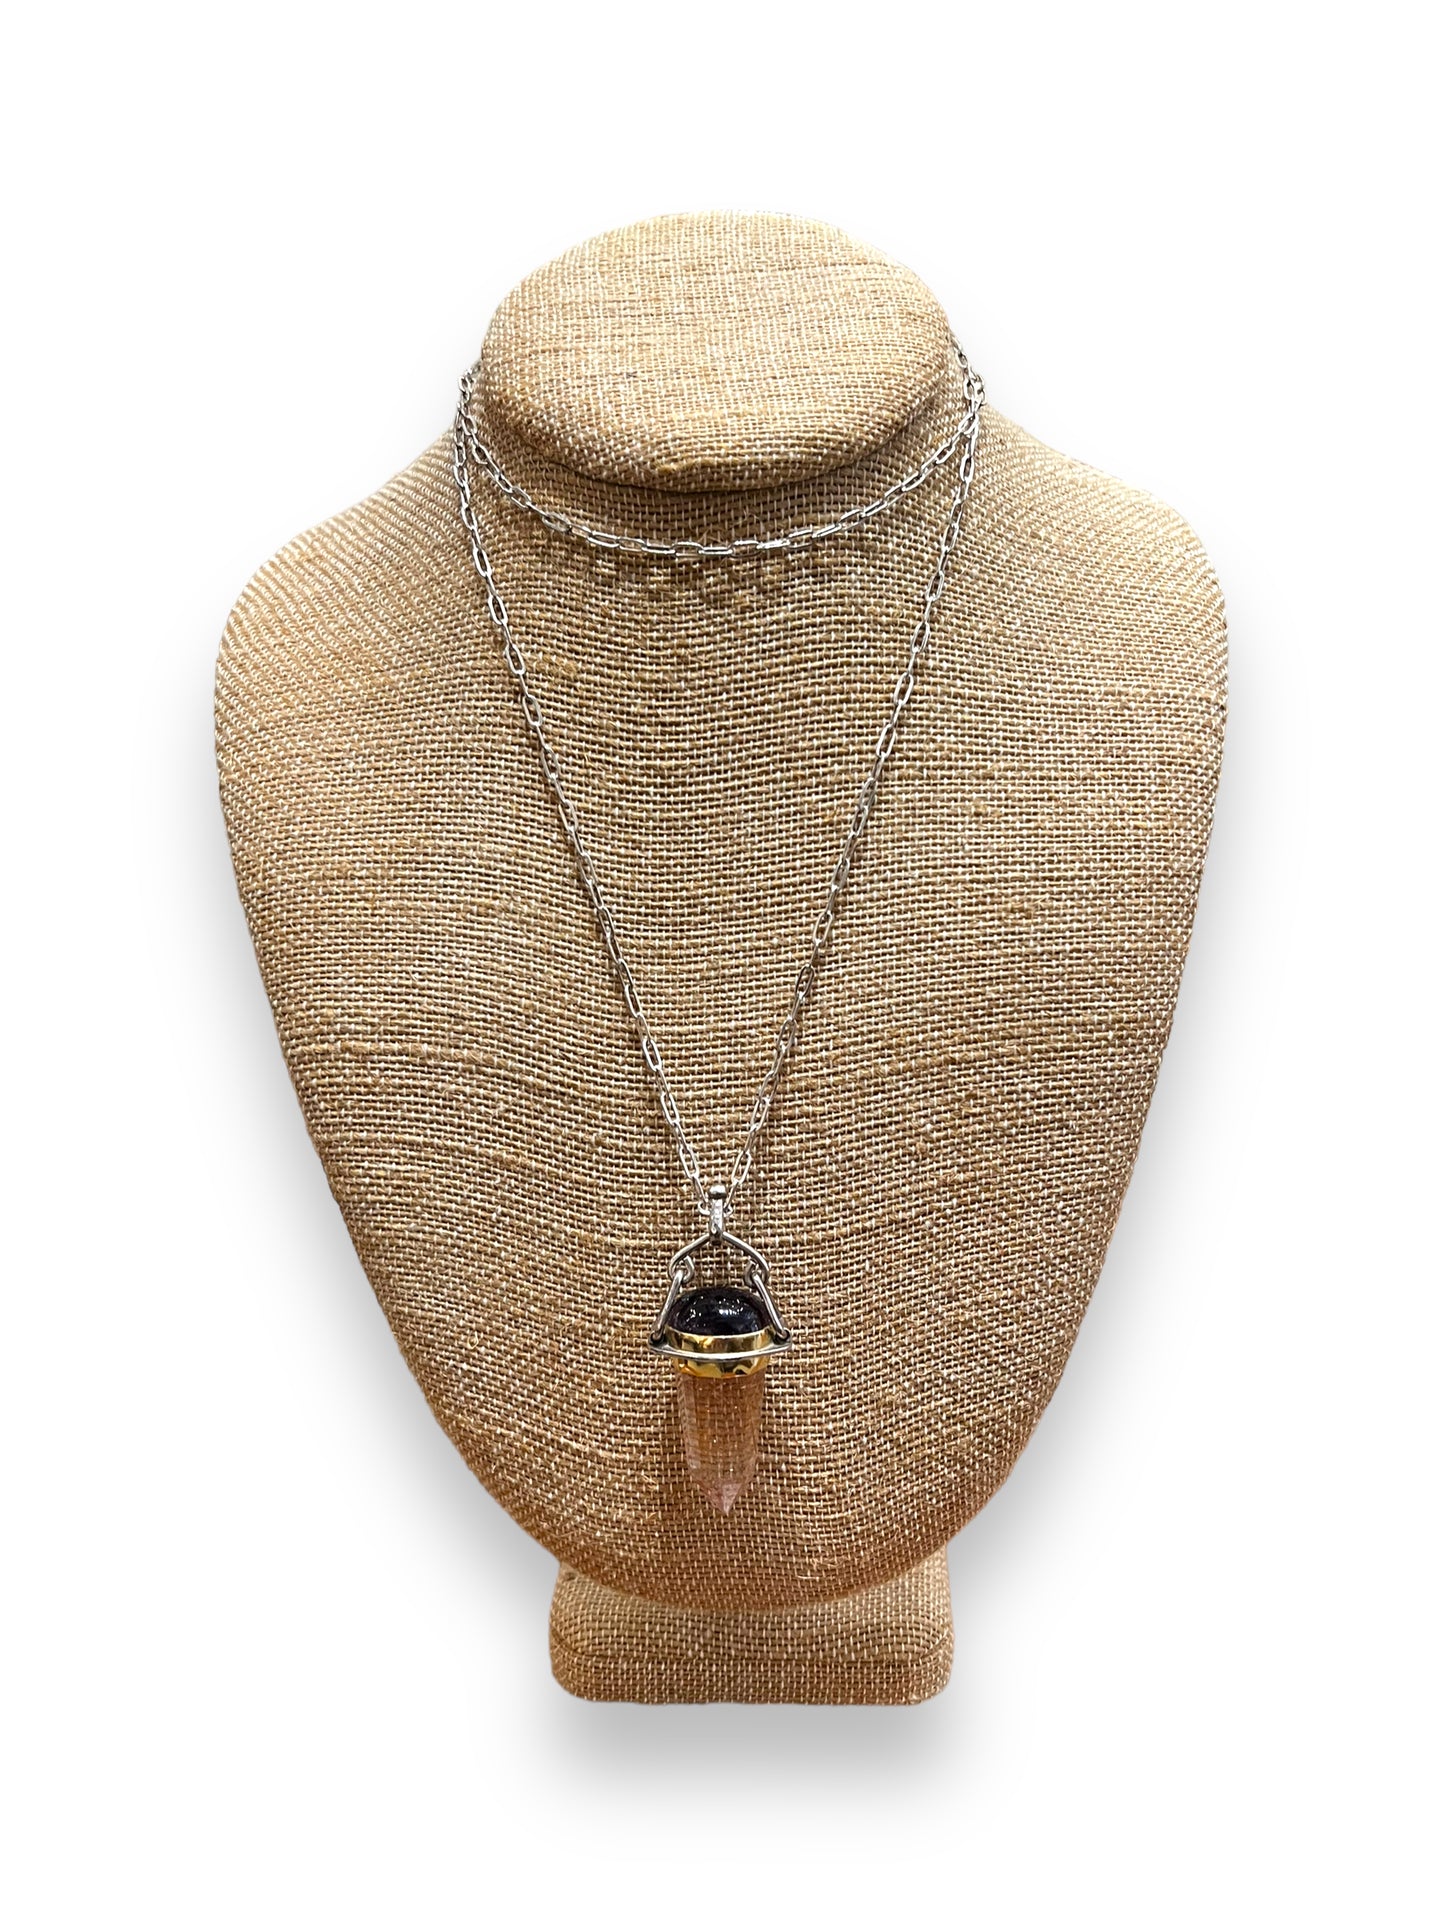 Silver, Gold, Amethyst and Quartz Crystal Necklace - DeFrenS